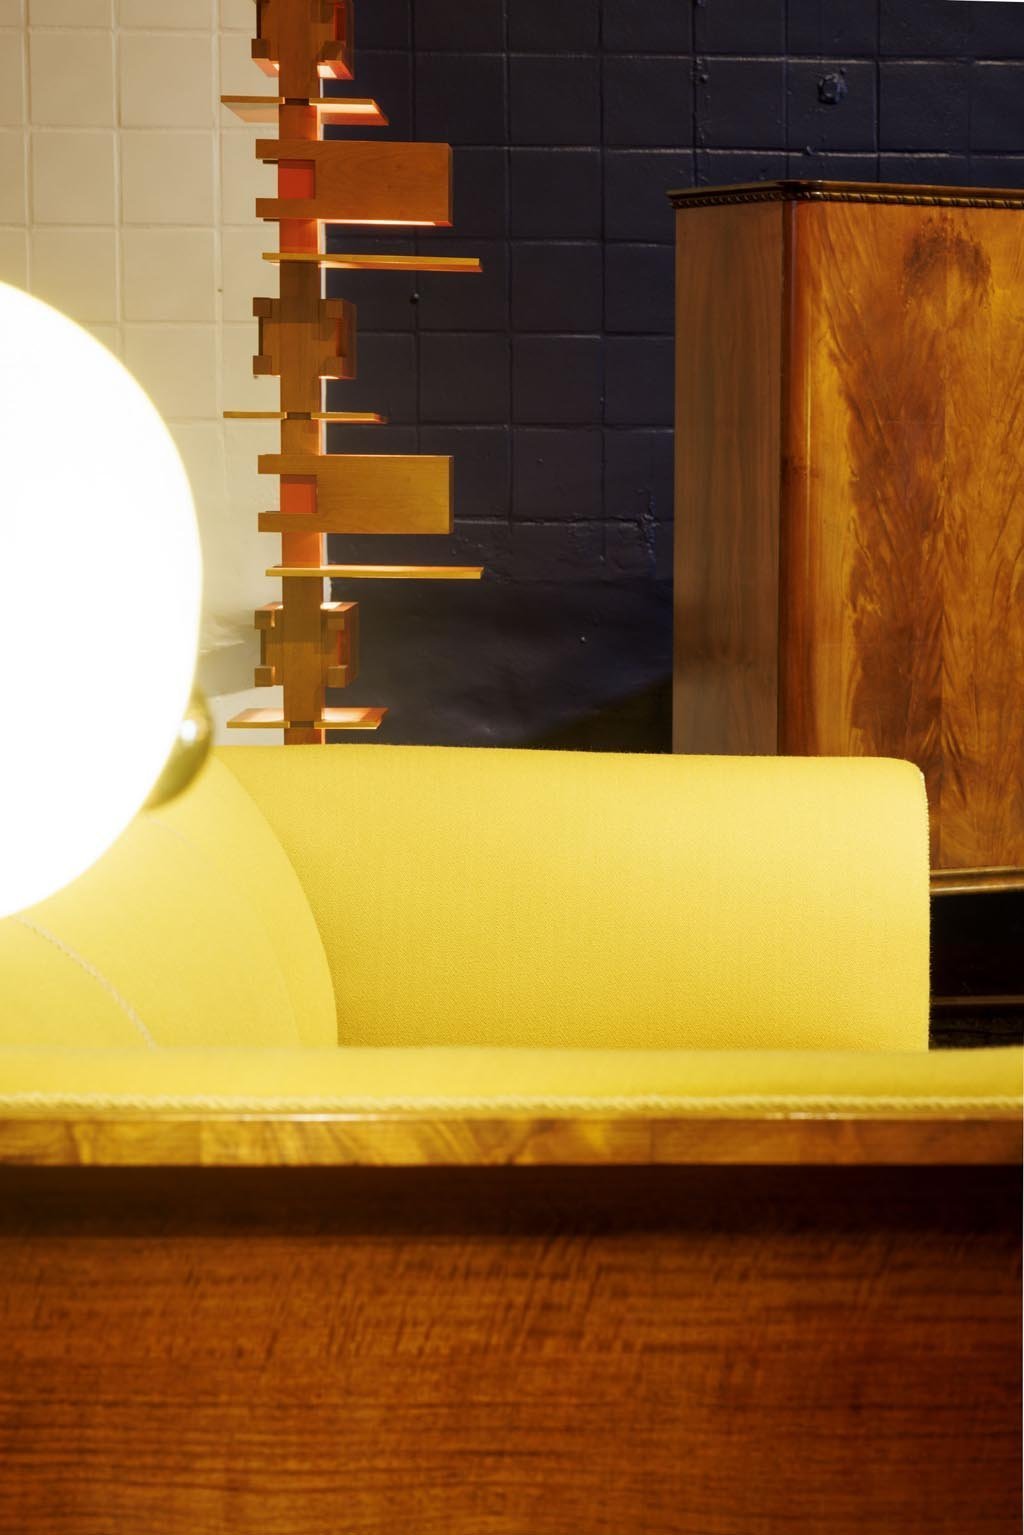 behind the sofa: Floor lamp "Talisien", 1930 by Frank Lloyd Wright, solid cherry